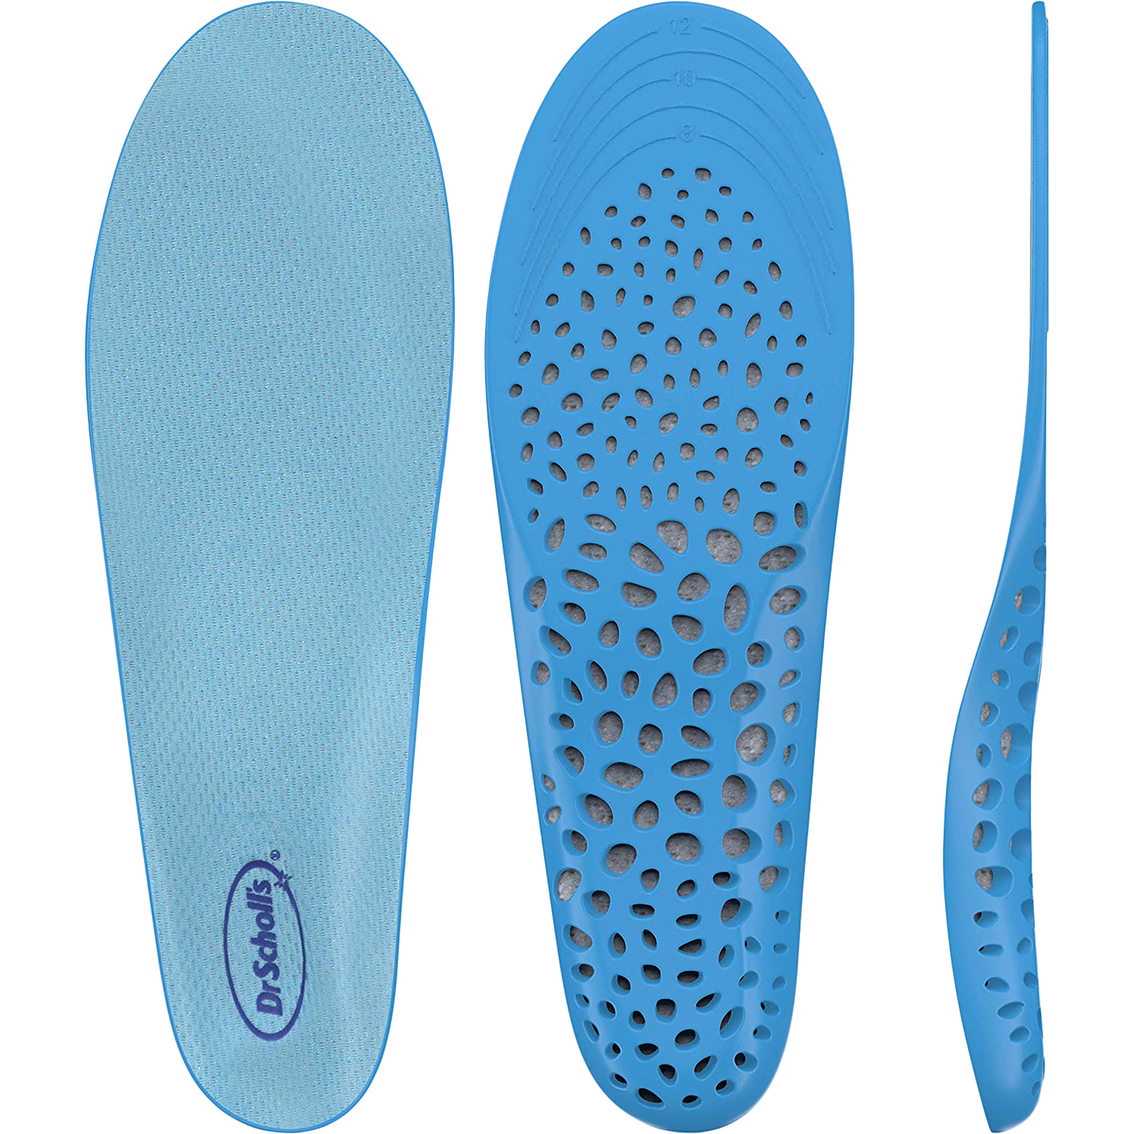 Dr. Scholl's Comfort and Energy Ultracool Insoles For Men - Image 3 of 3